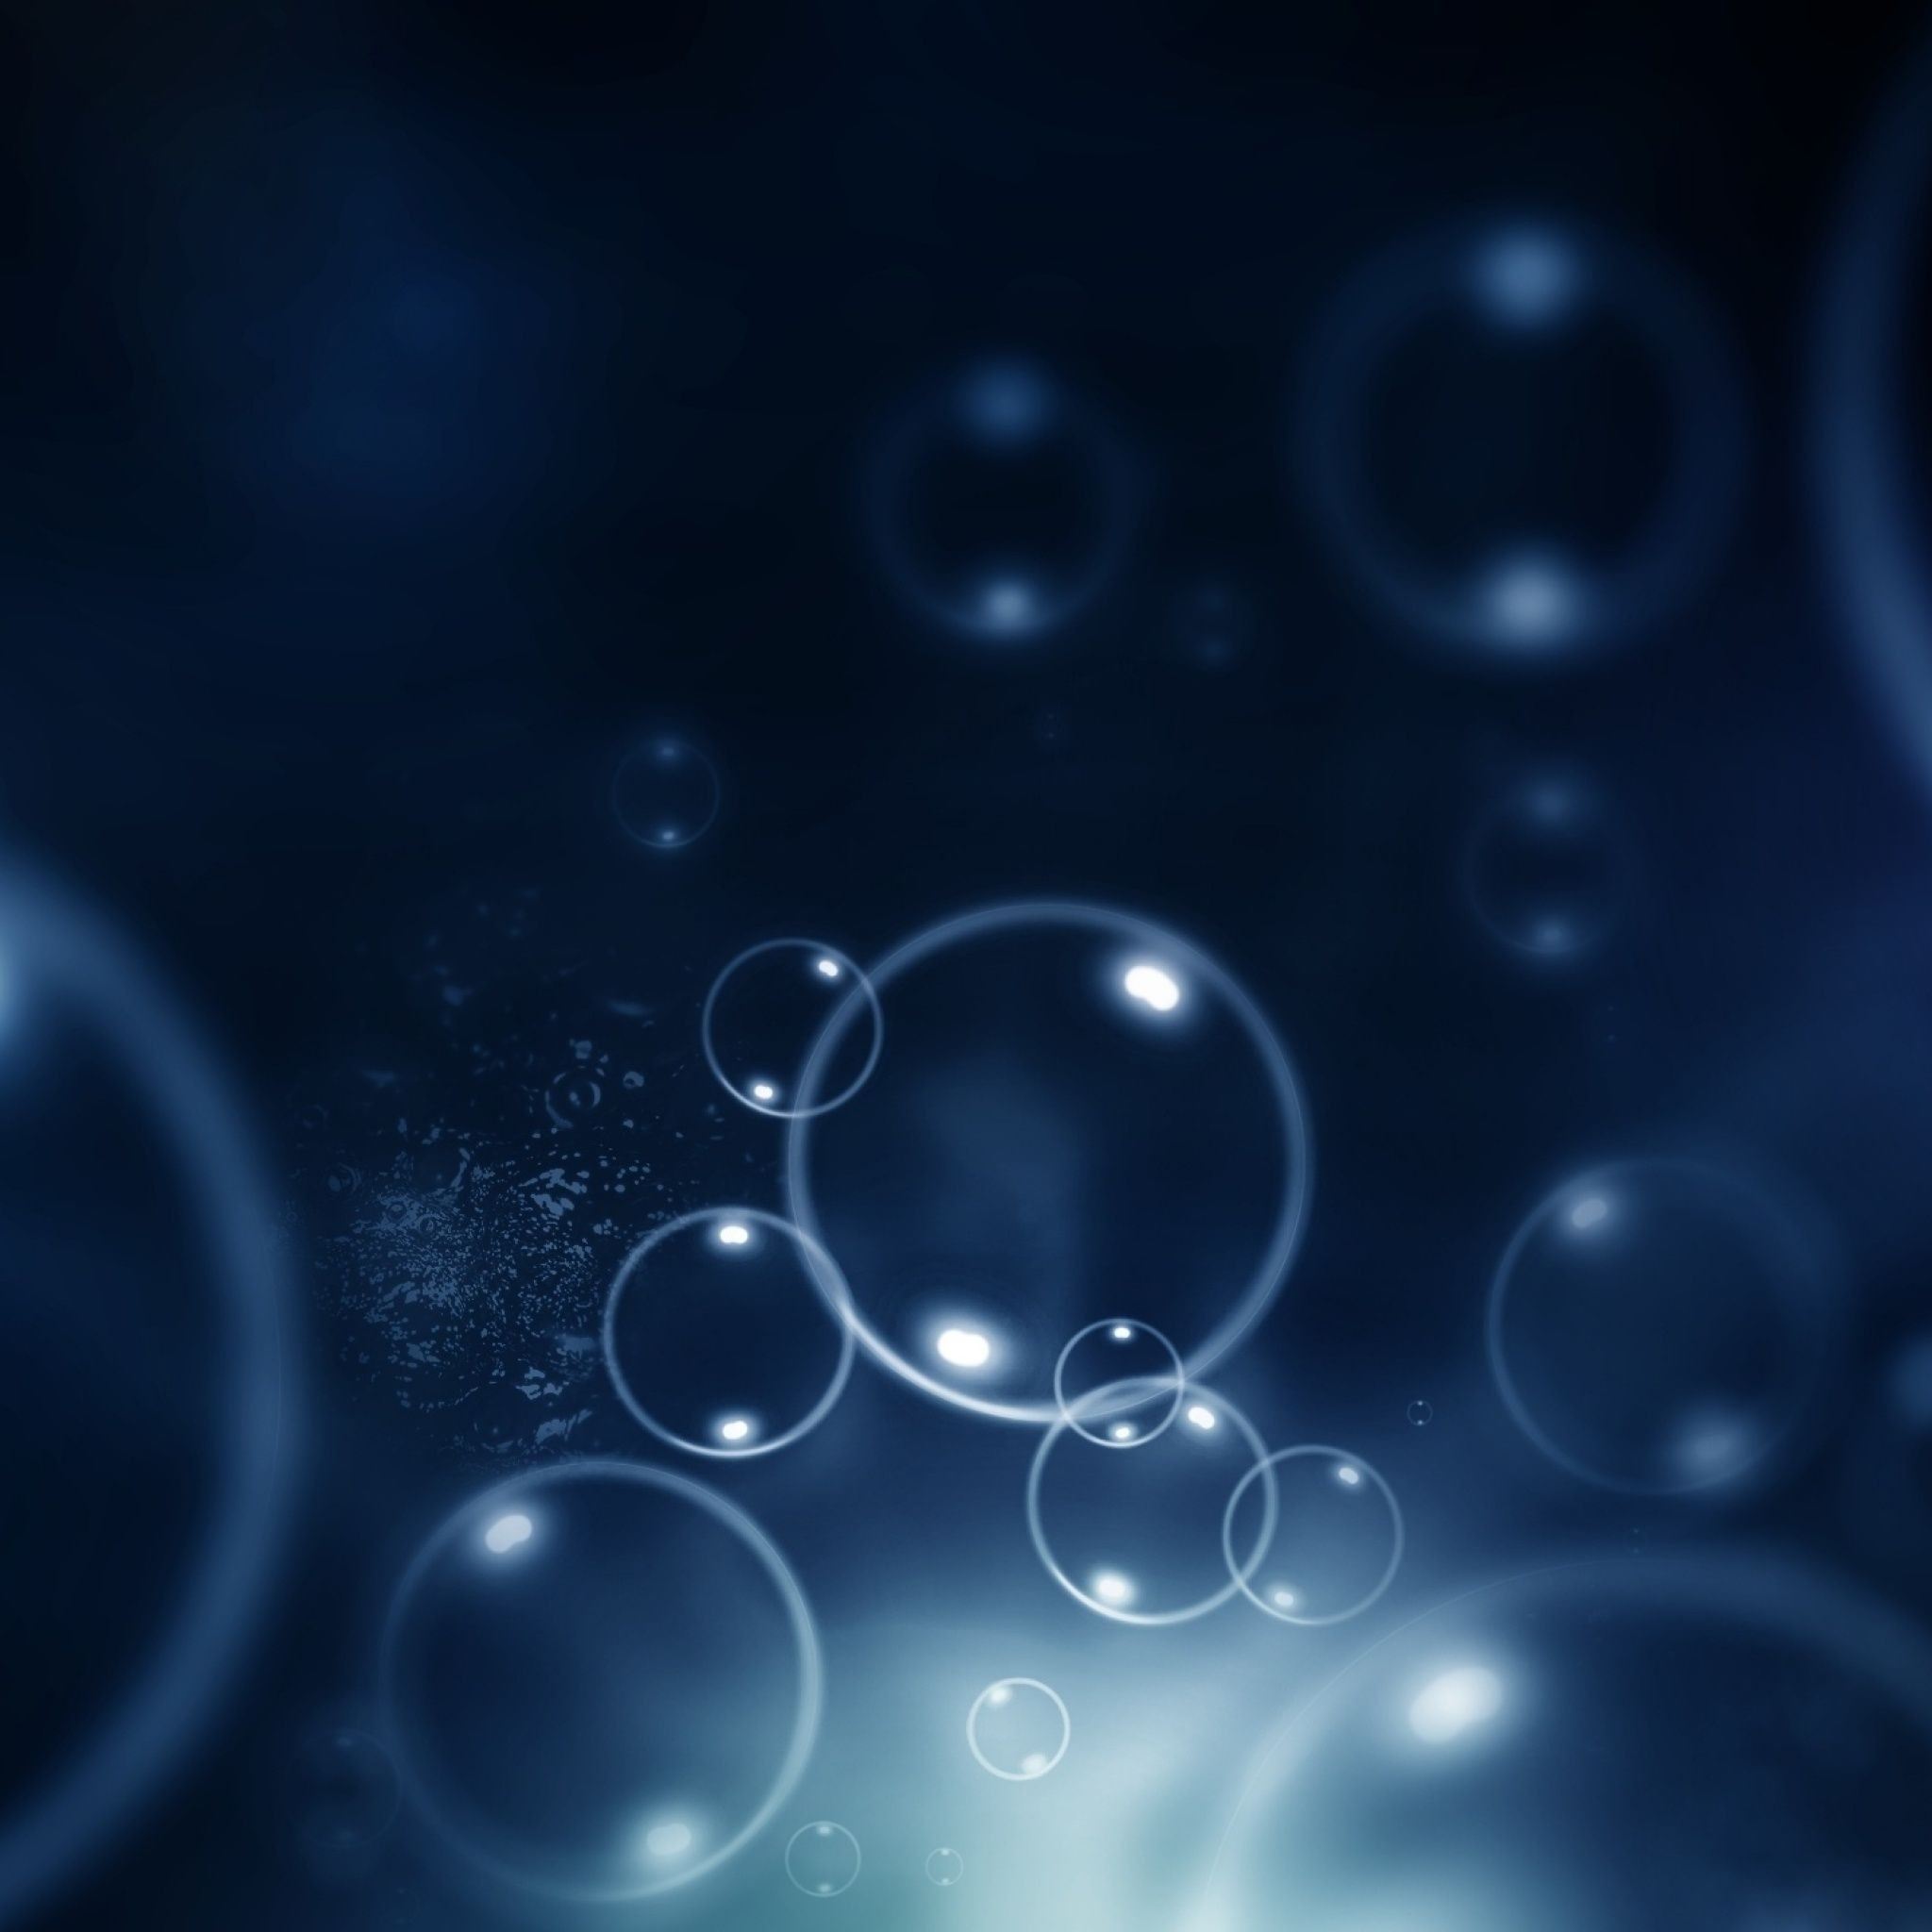 Aesthetic Bubbles Wallpapers